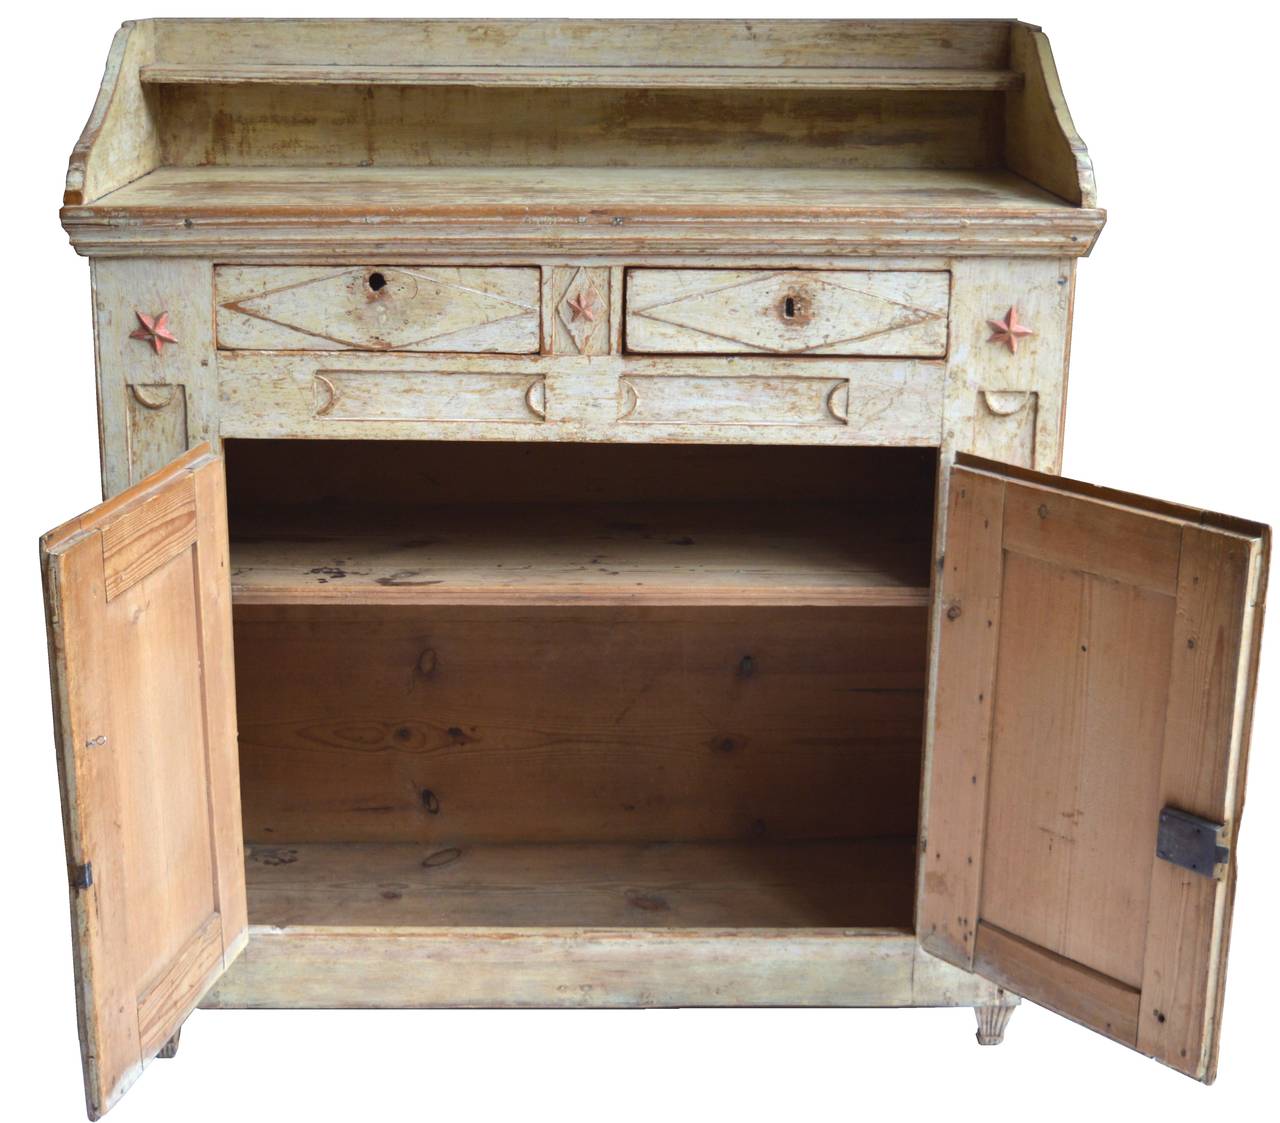 Swedish Gustavian buffet retaining the original paint, circa 1790.
This is a top example of Gustavian design with highly desirable light butter yellow color, carved star details in orange (also original paint) and carved reeding.
Note that the